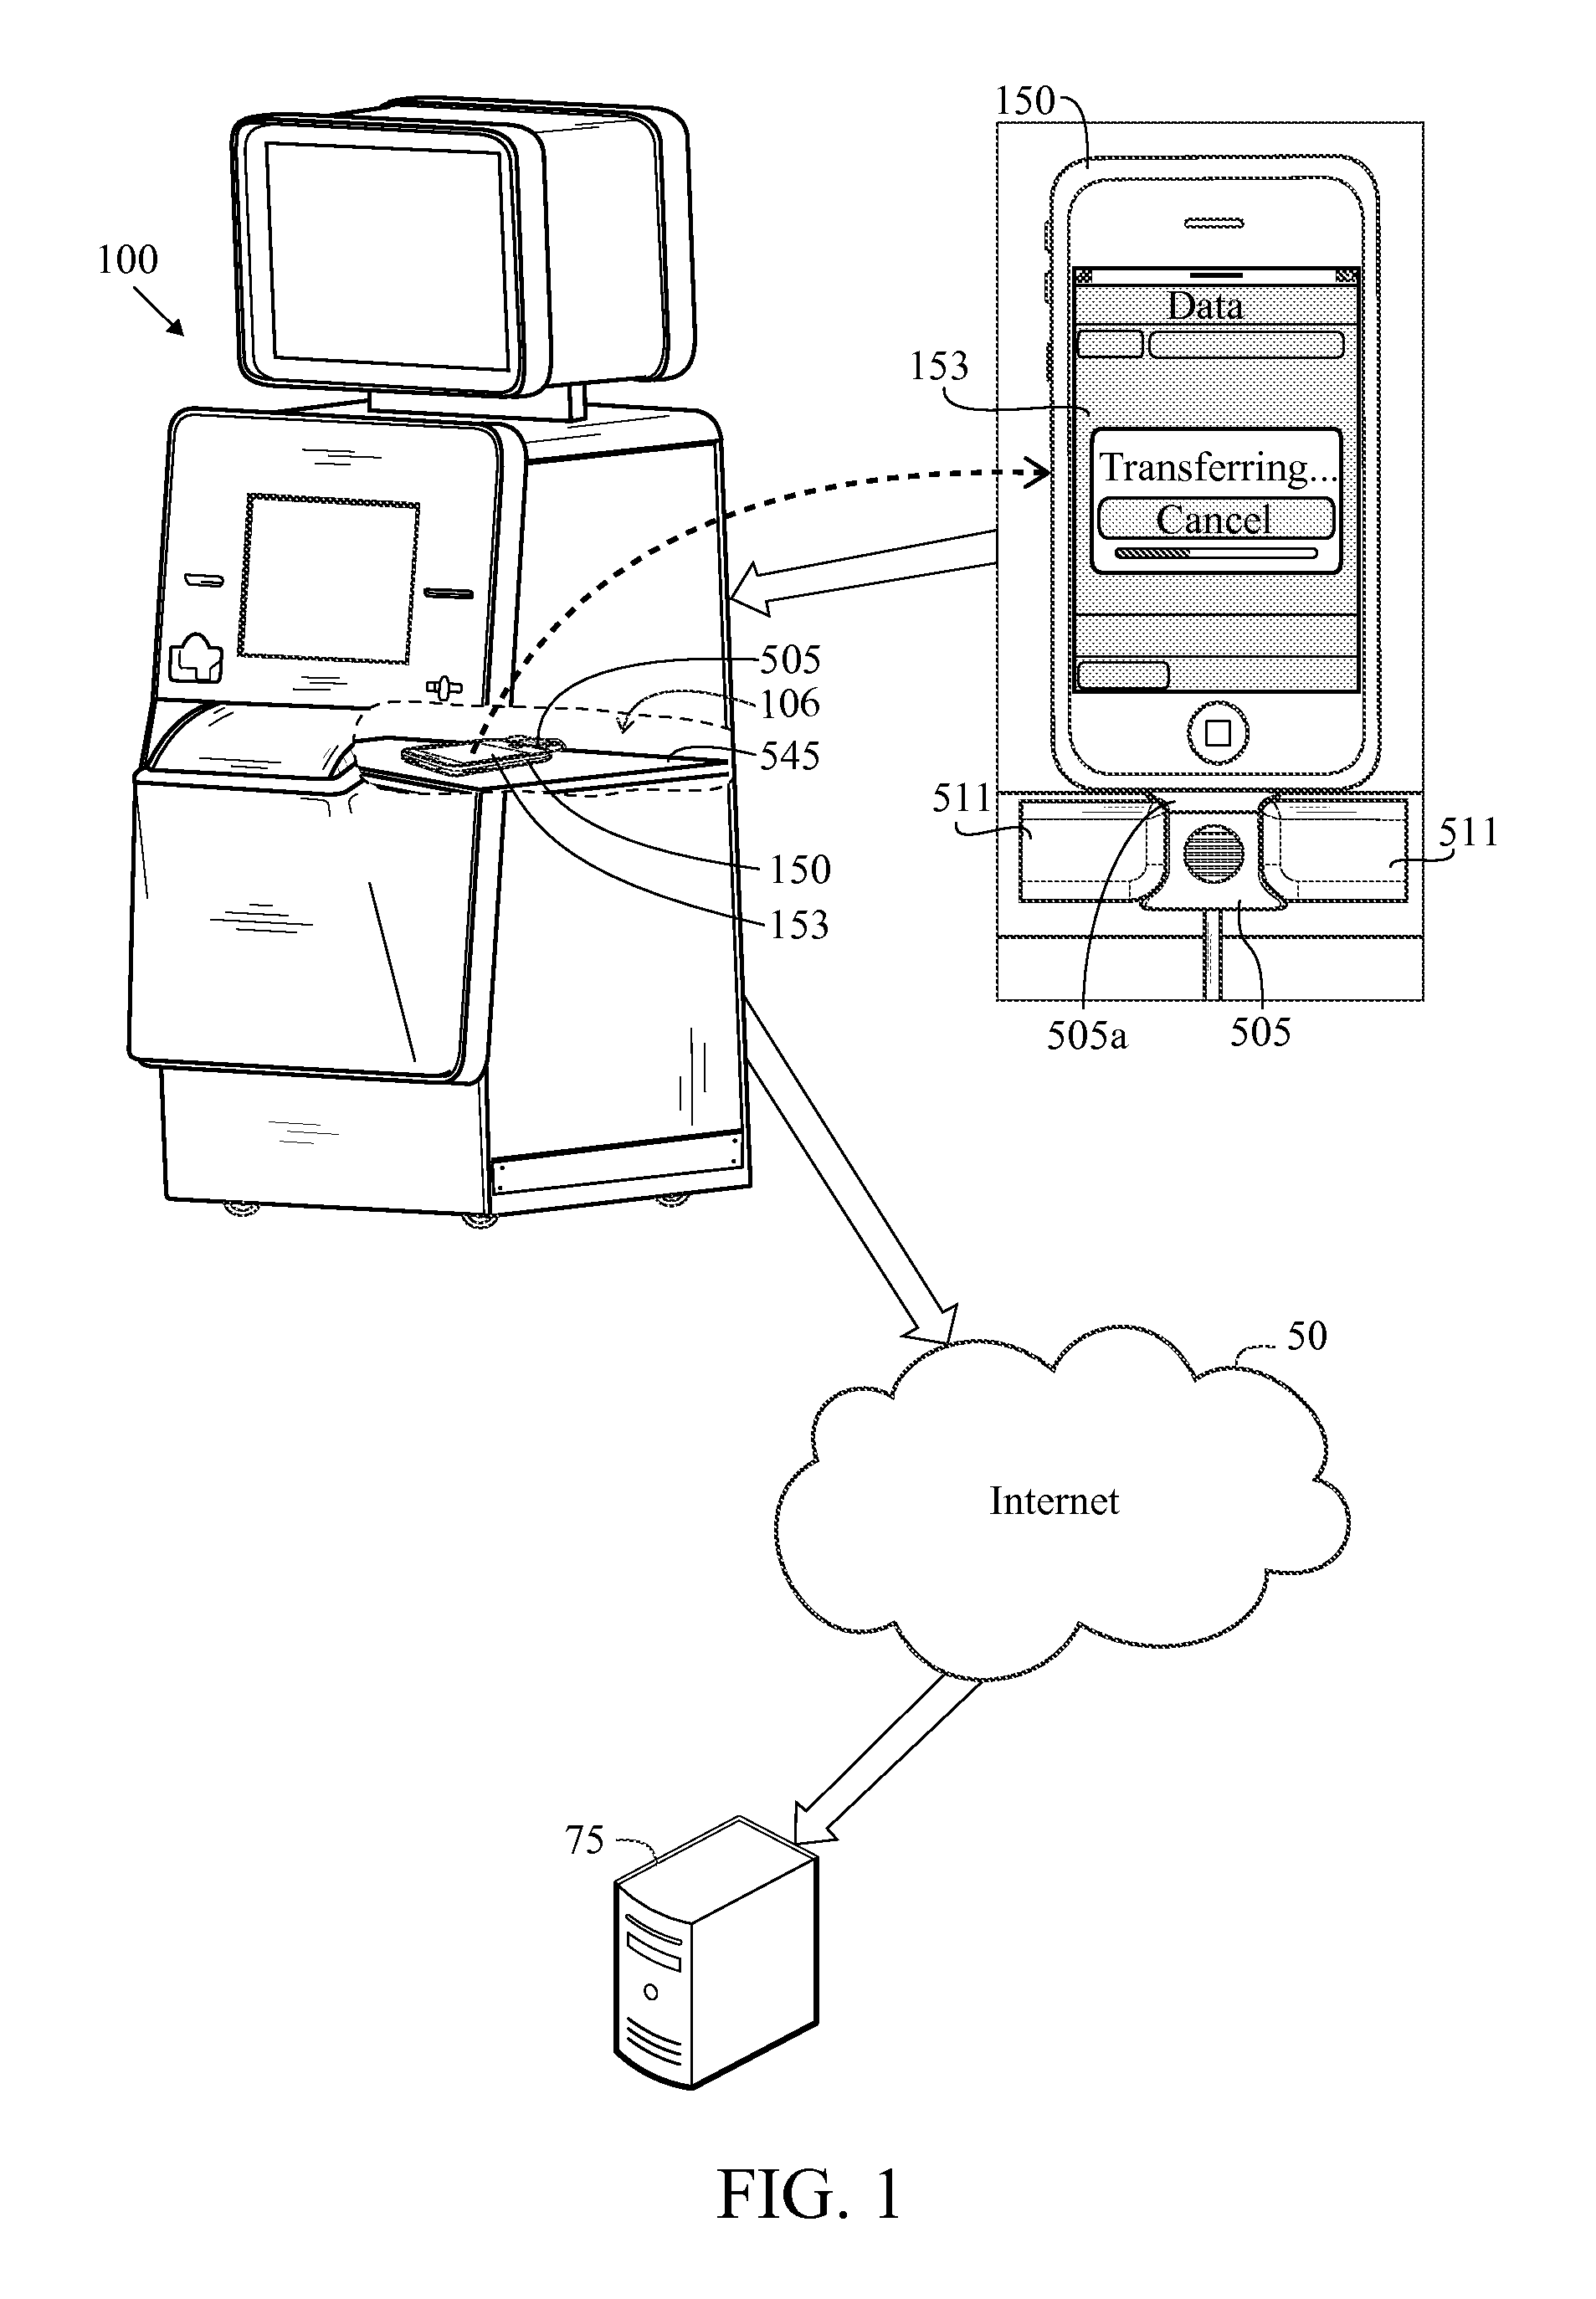 Method And System For Recycling Electronic Devices In Compliance with Second Hand Dealer Laws